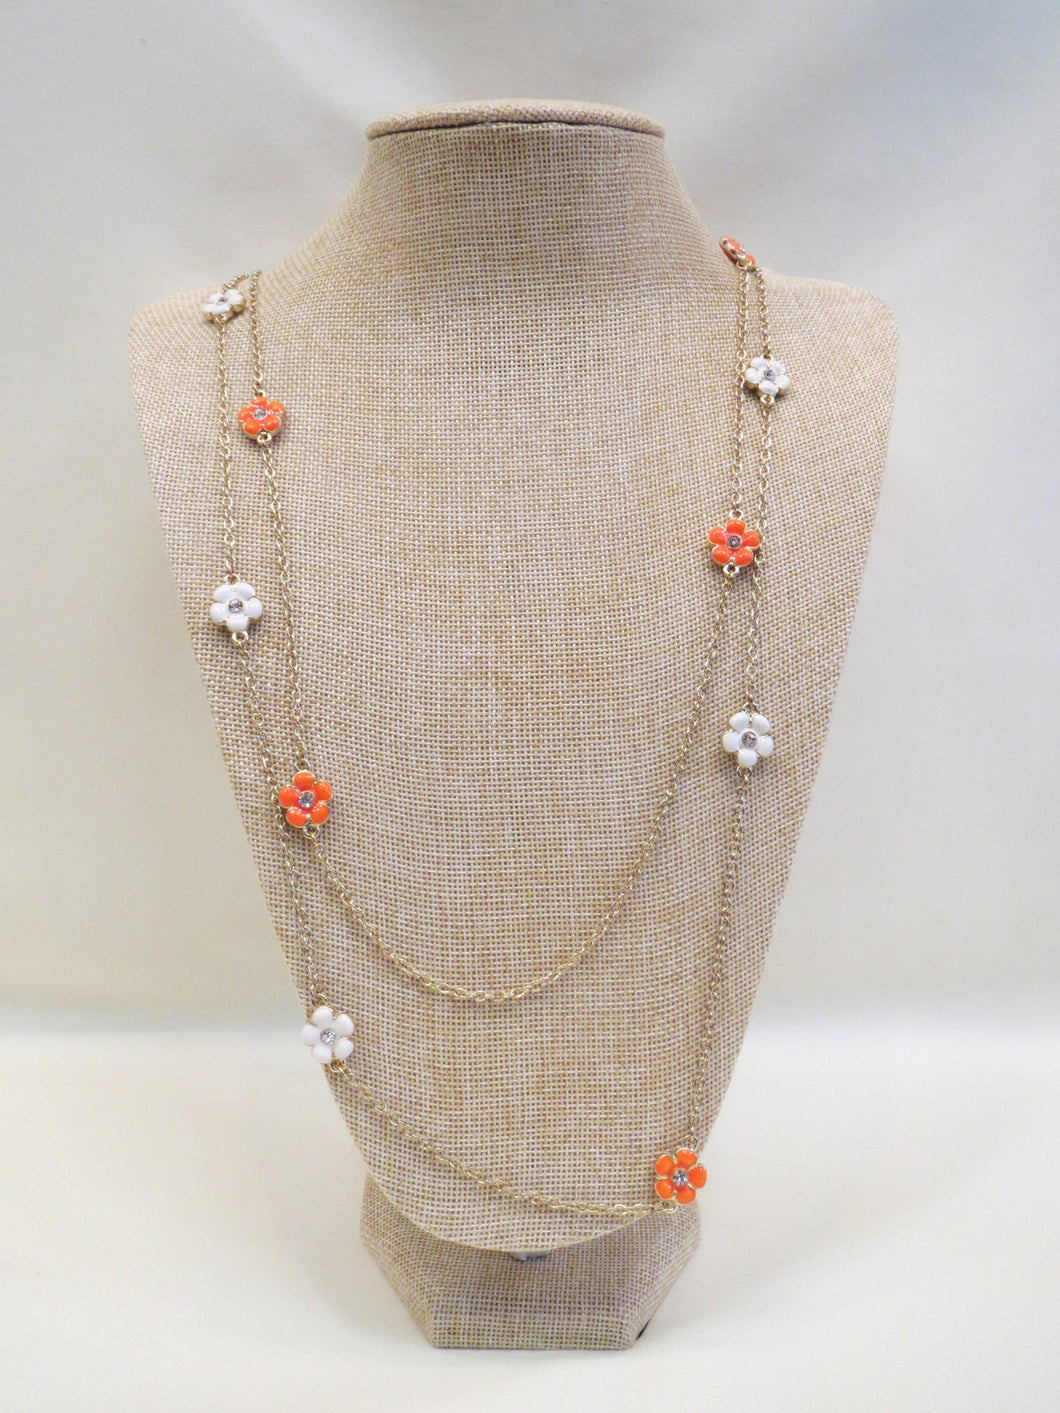 ADO | Orange & White Daisies Gold Chain Necklace Long - All Decd Out